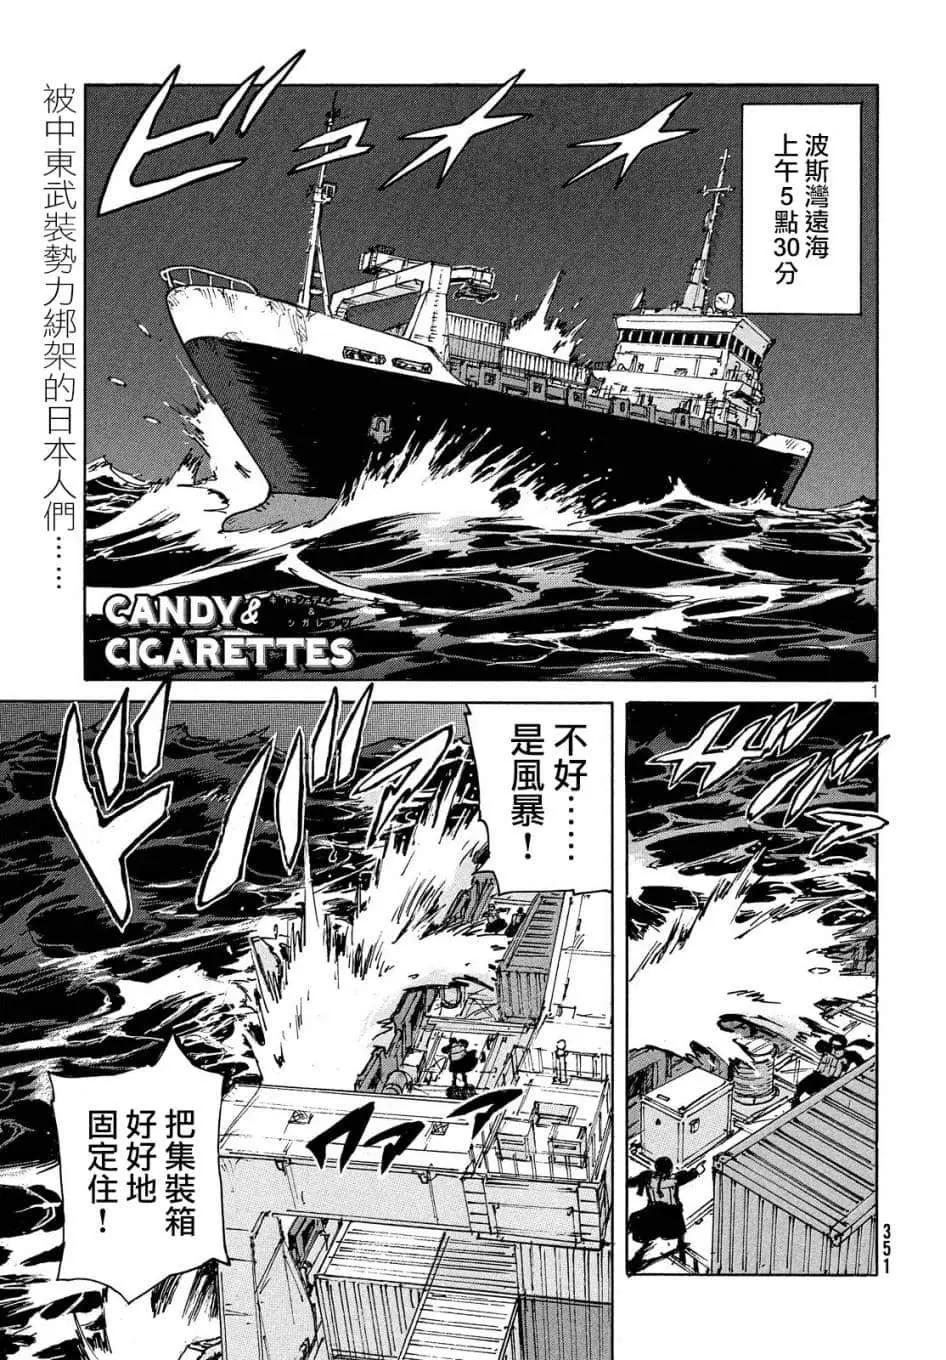 CANDY & CIGARETTES - 第33話 - 1